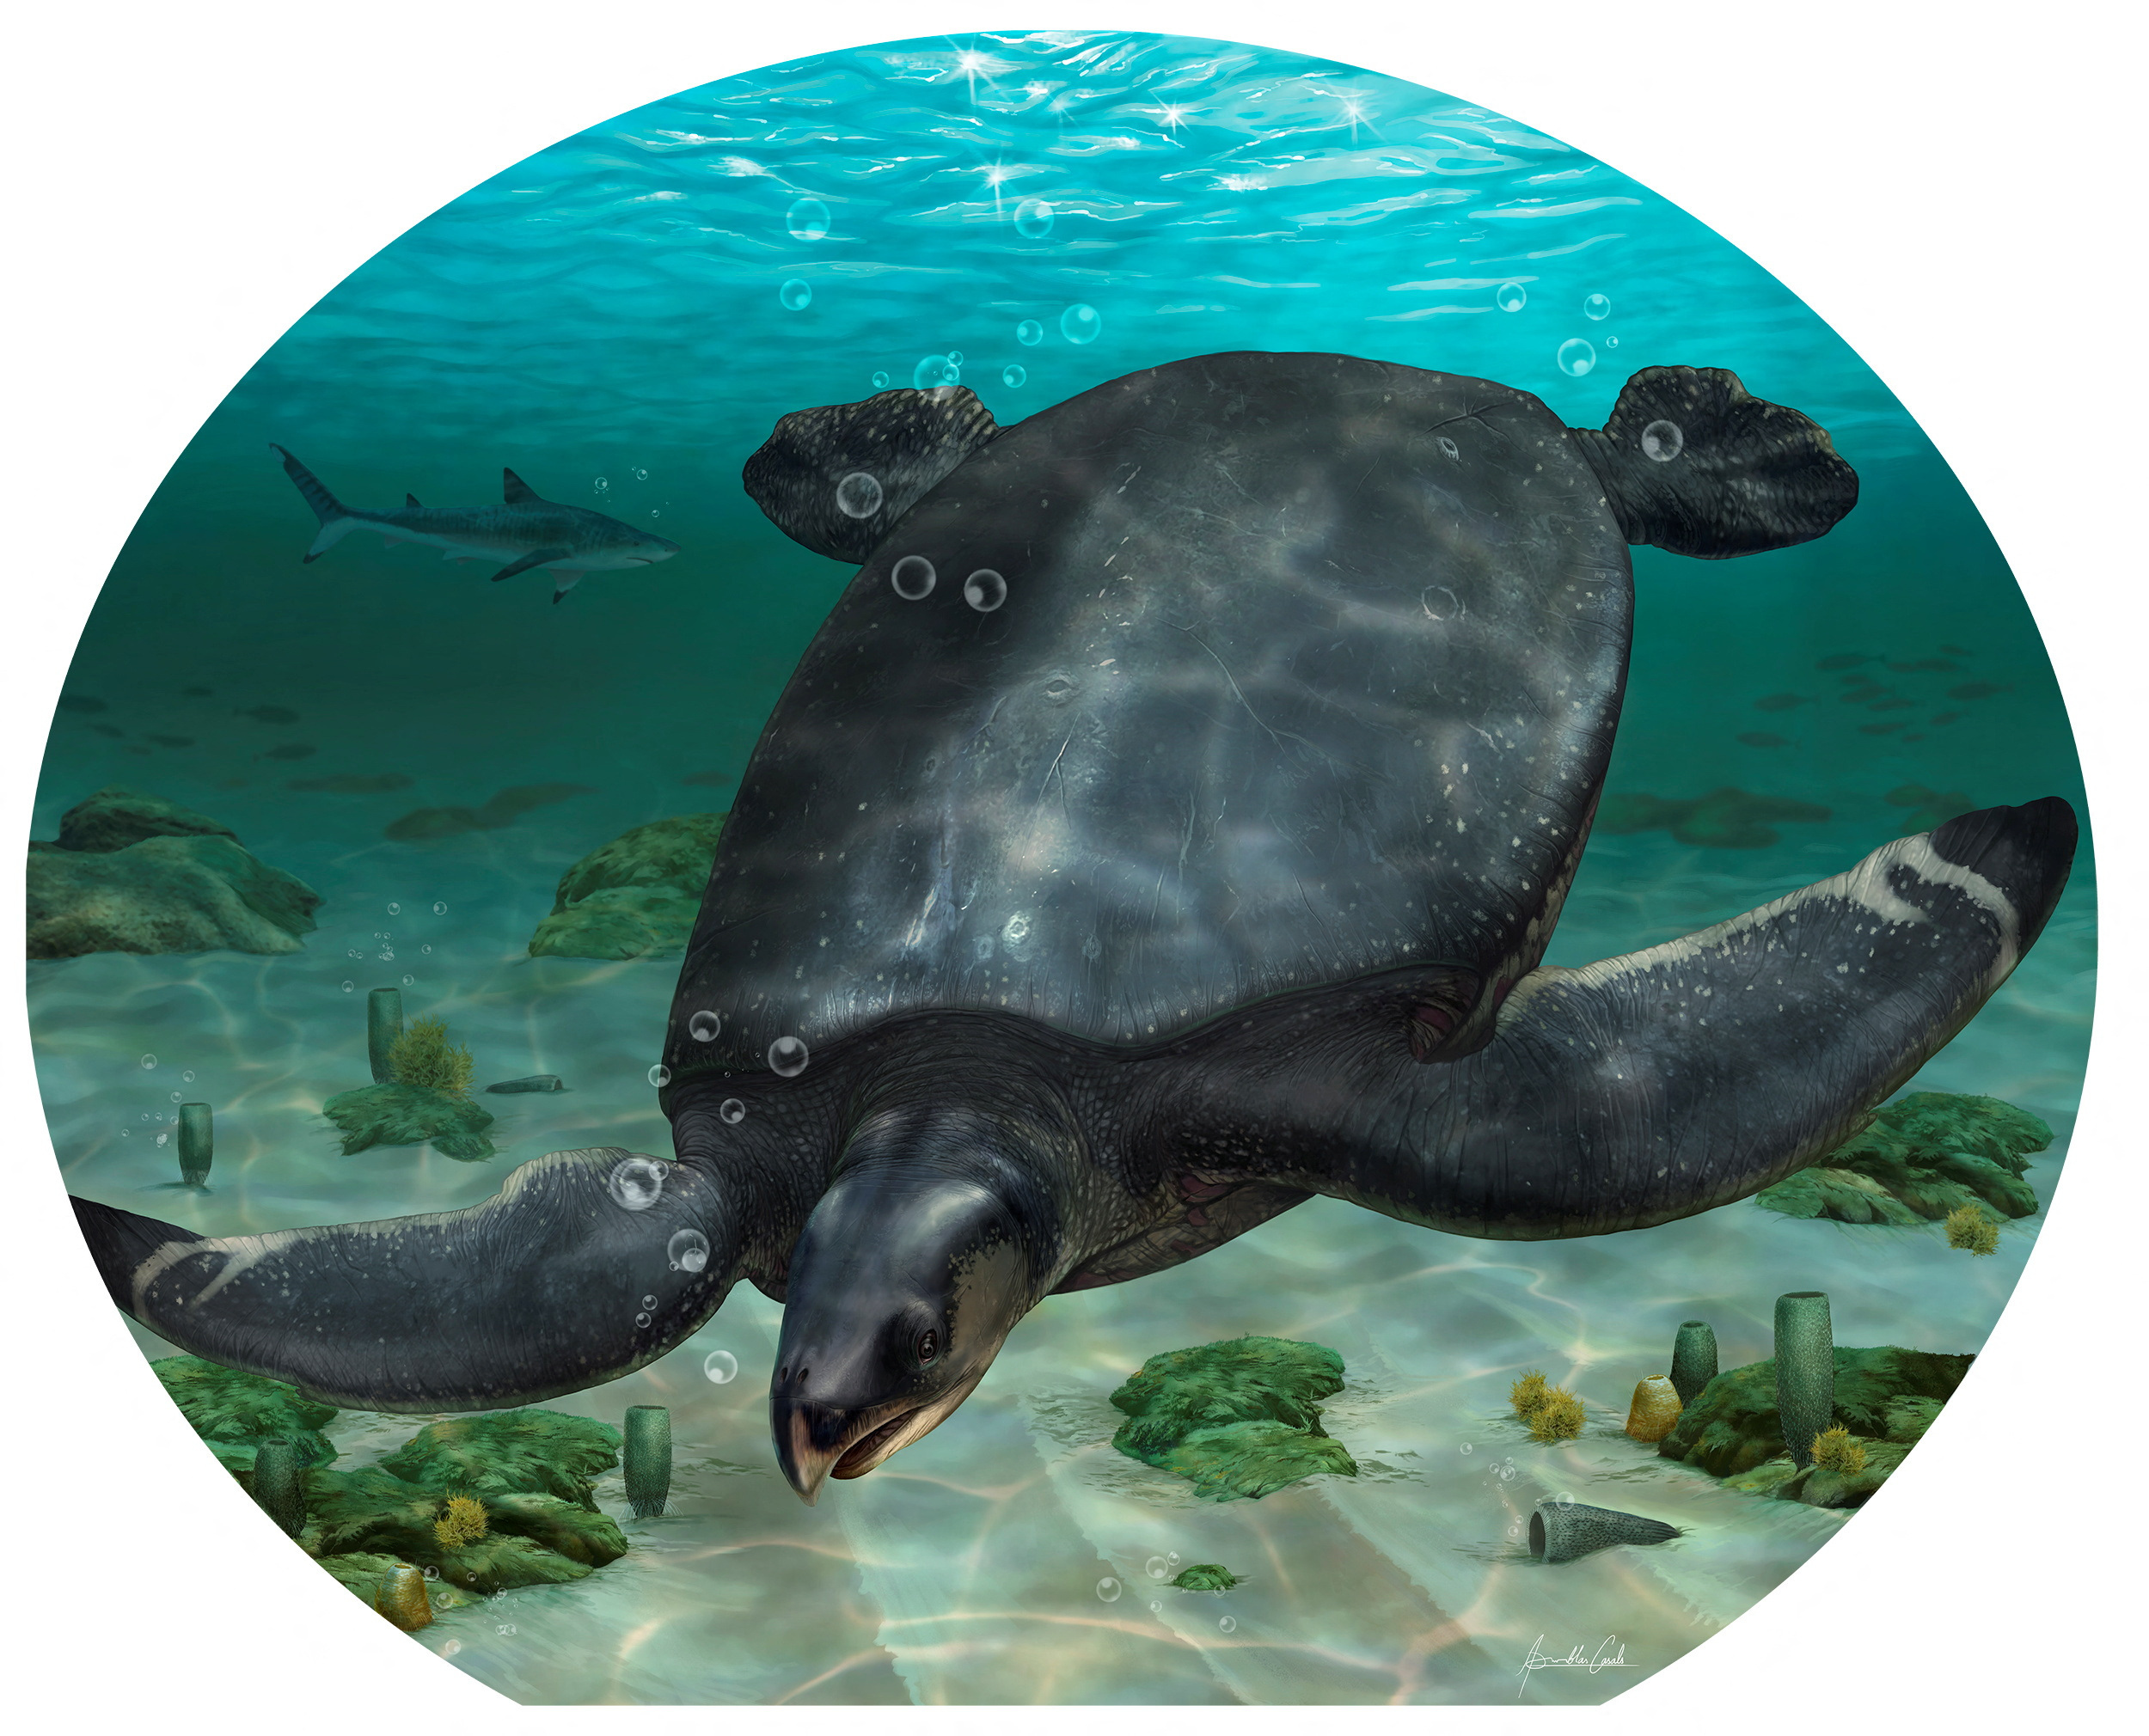 An illustrated reconstruction of the Great Cretaceous sea turtle Leviathanochelys aenigmatica